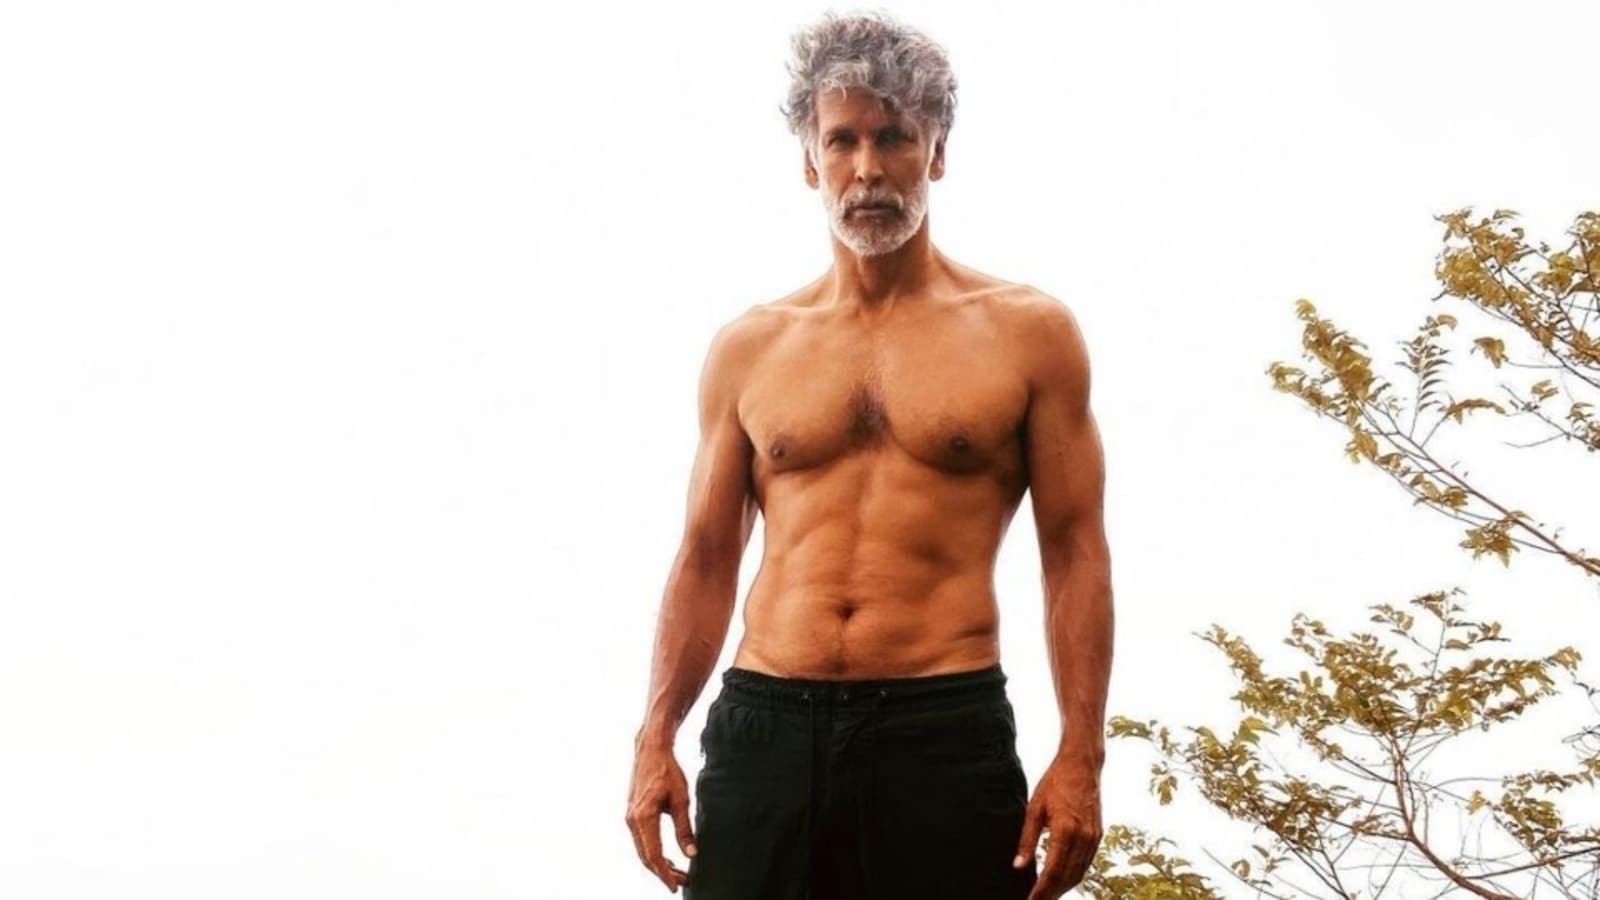 Milind Soman's impressive core strength in new shirtless video will blow  your mind | Health - Hindustan Times